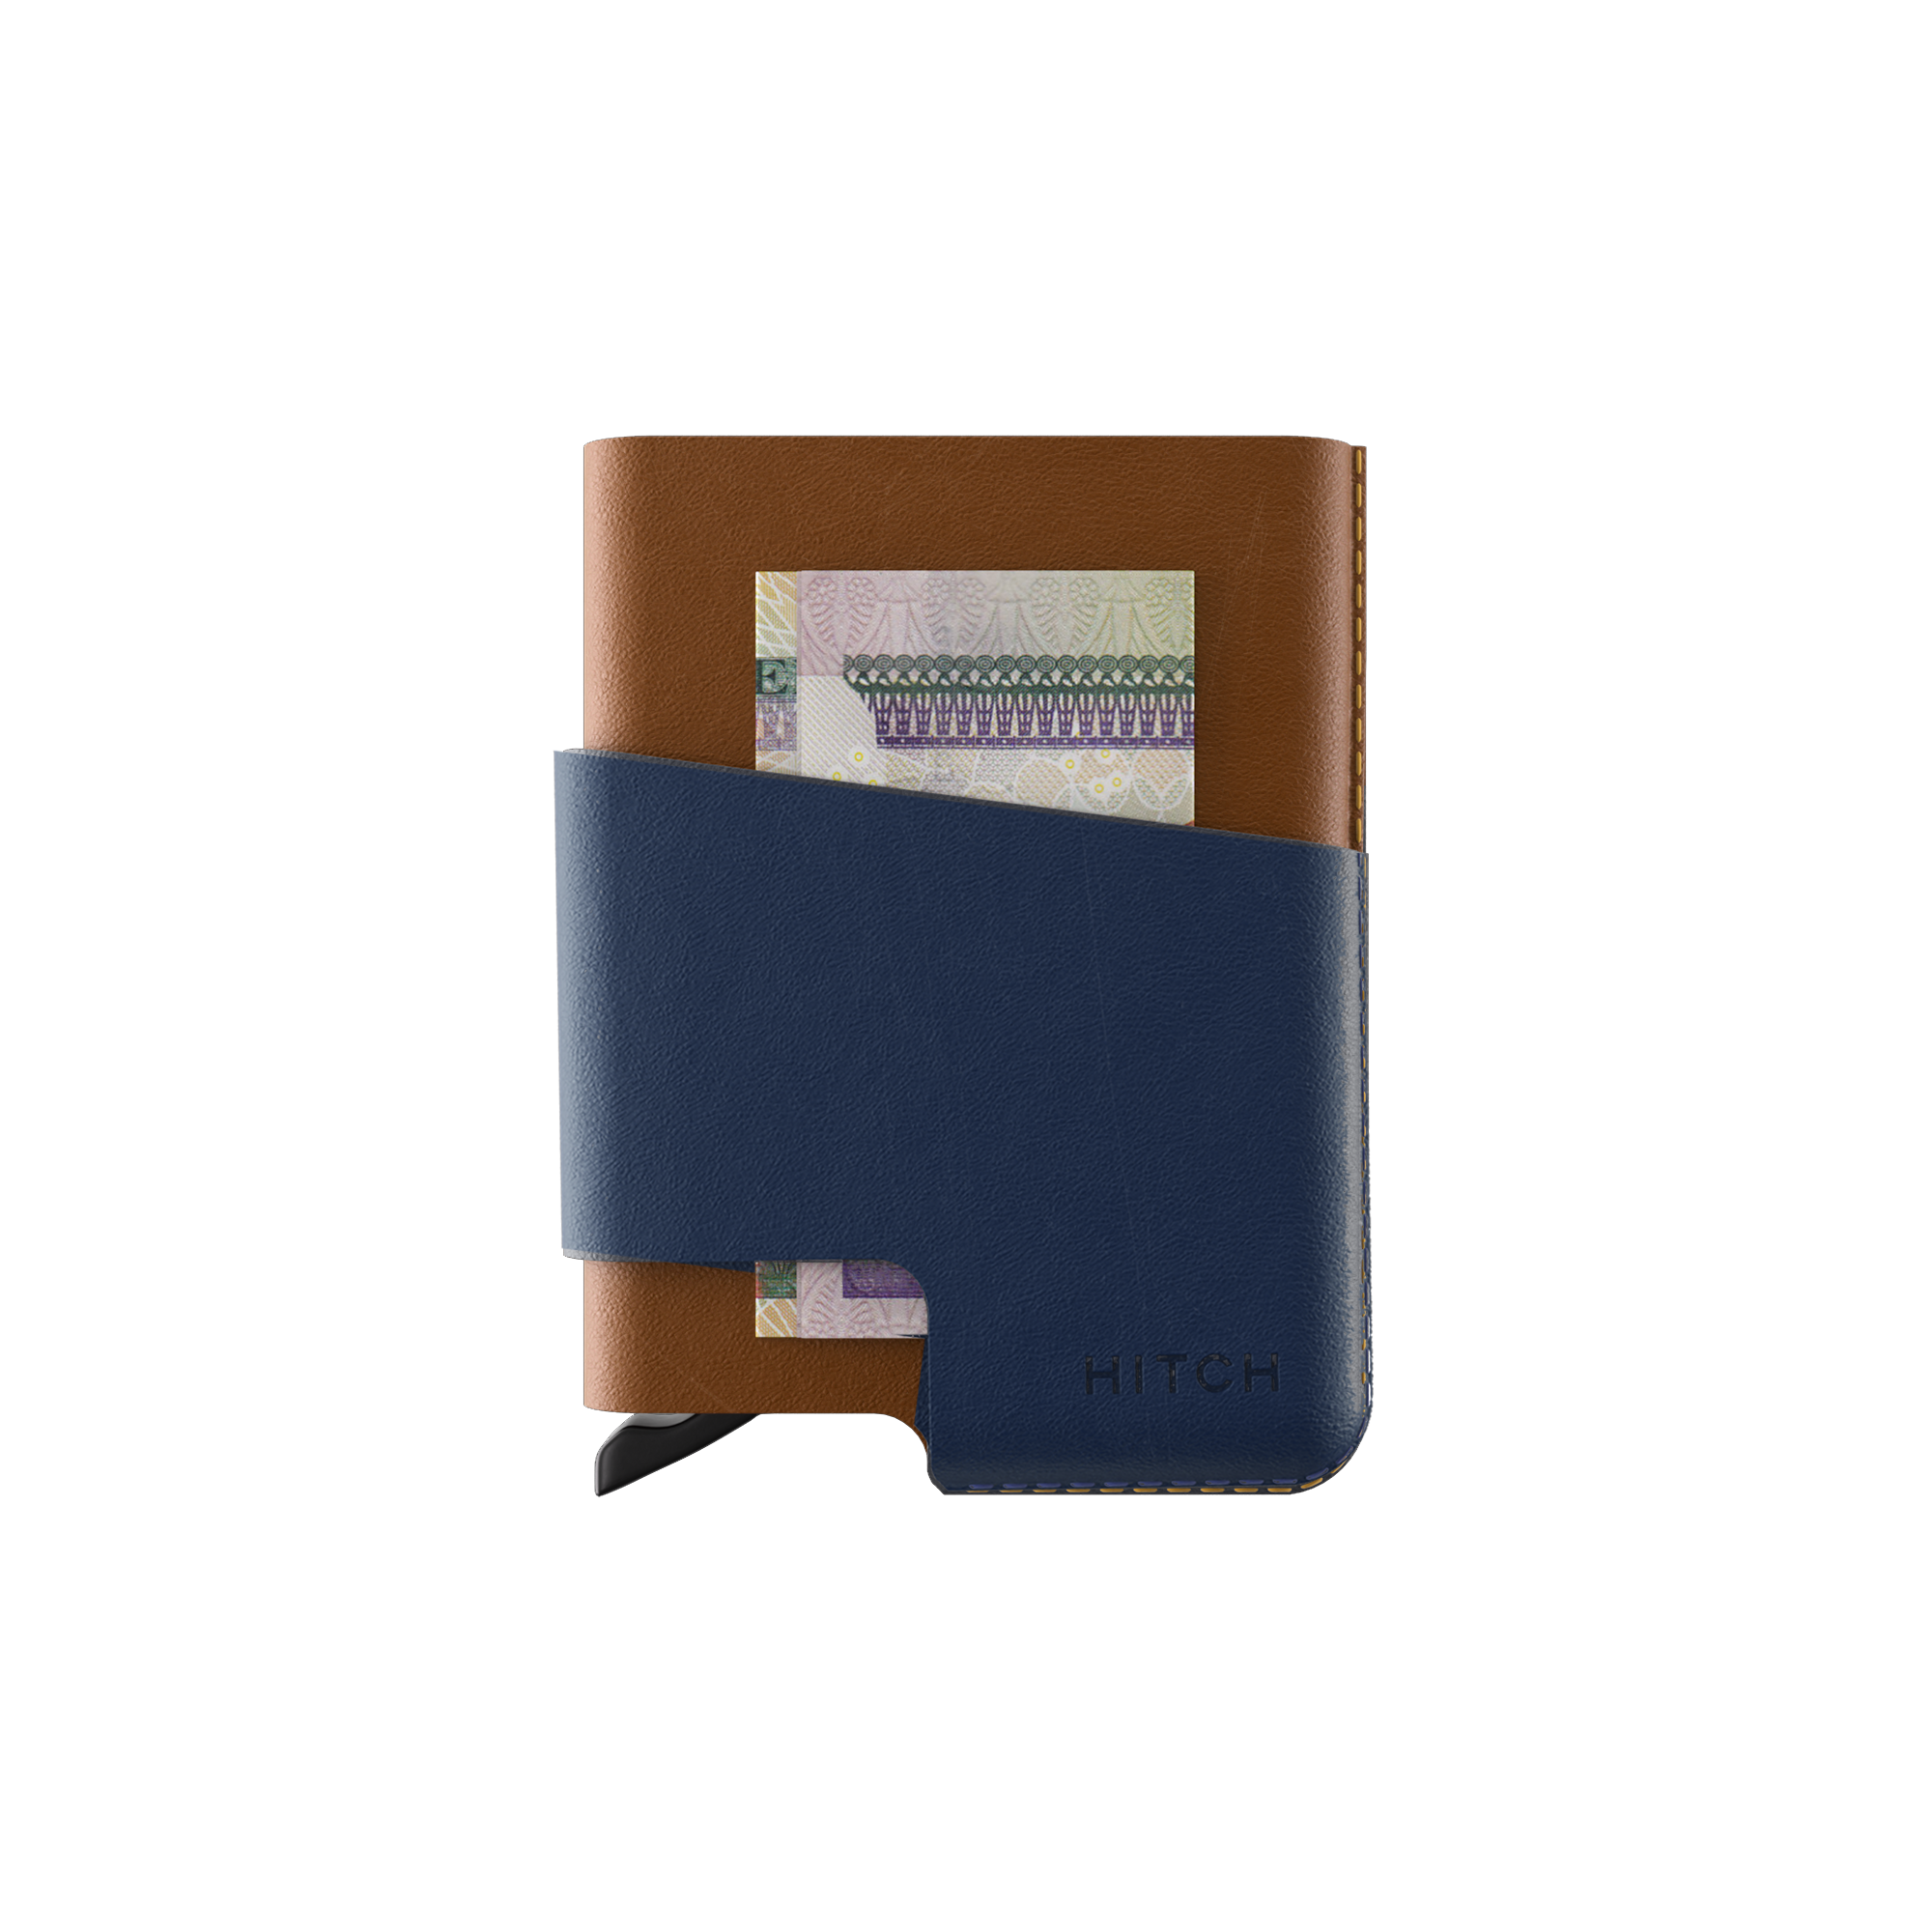 Brown and blue leather cardholder wallet with money clip and currency note.